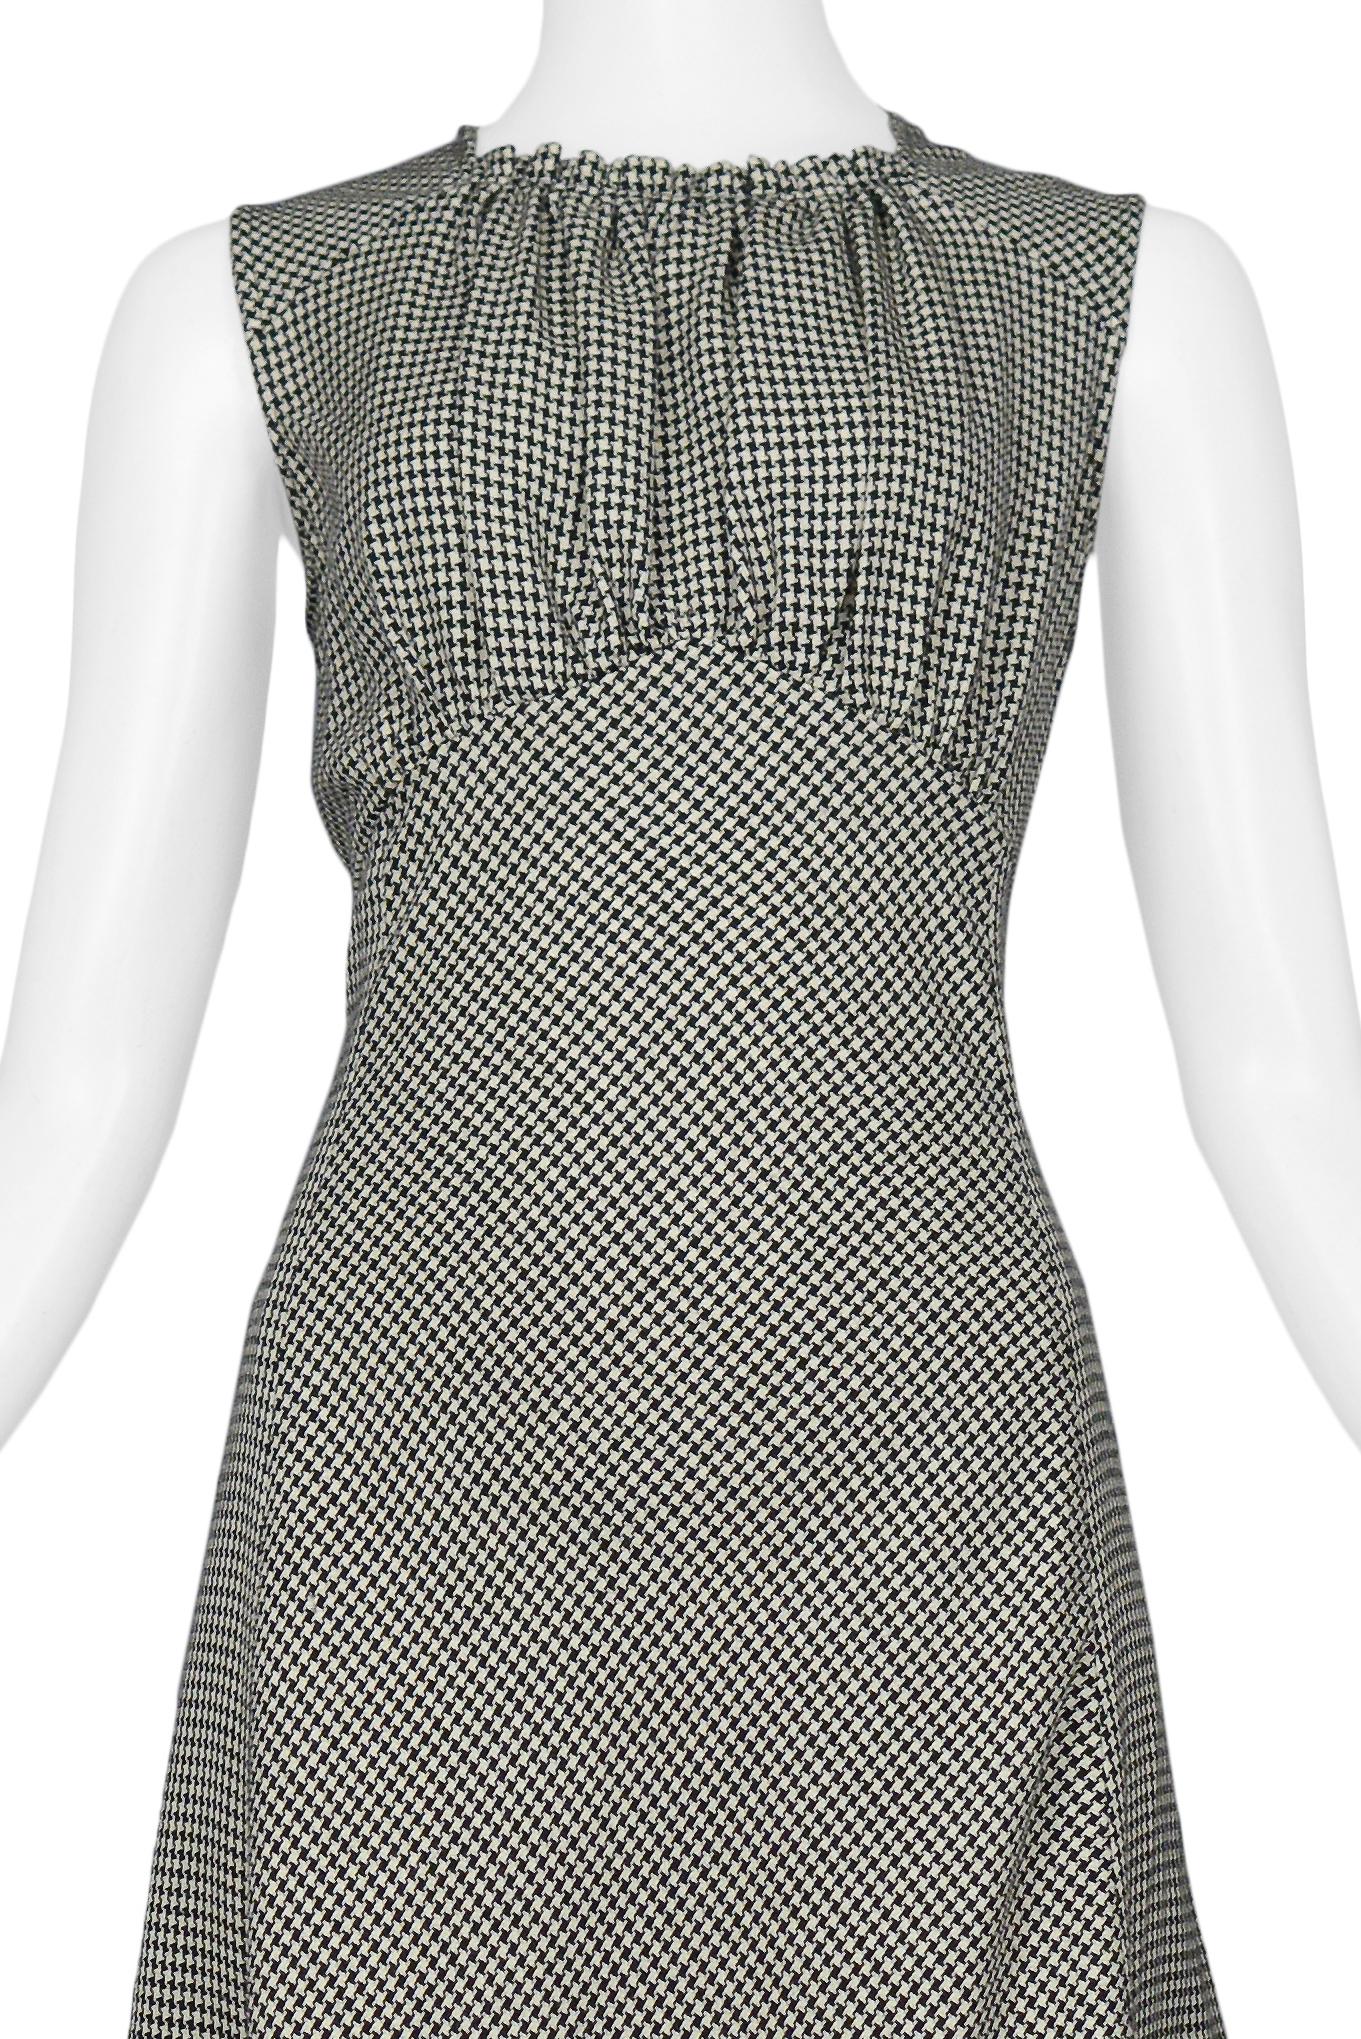 Comme Des Garcons Herringbone & Camouflage Dress 2001 In Excellent Condition In Los Angeles, CA